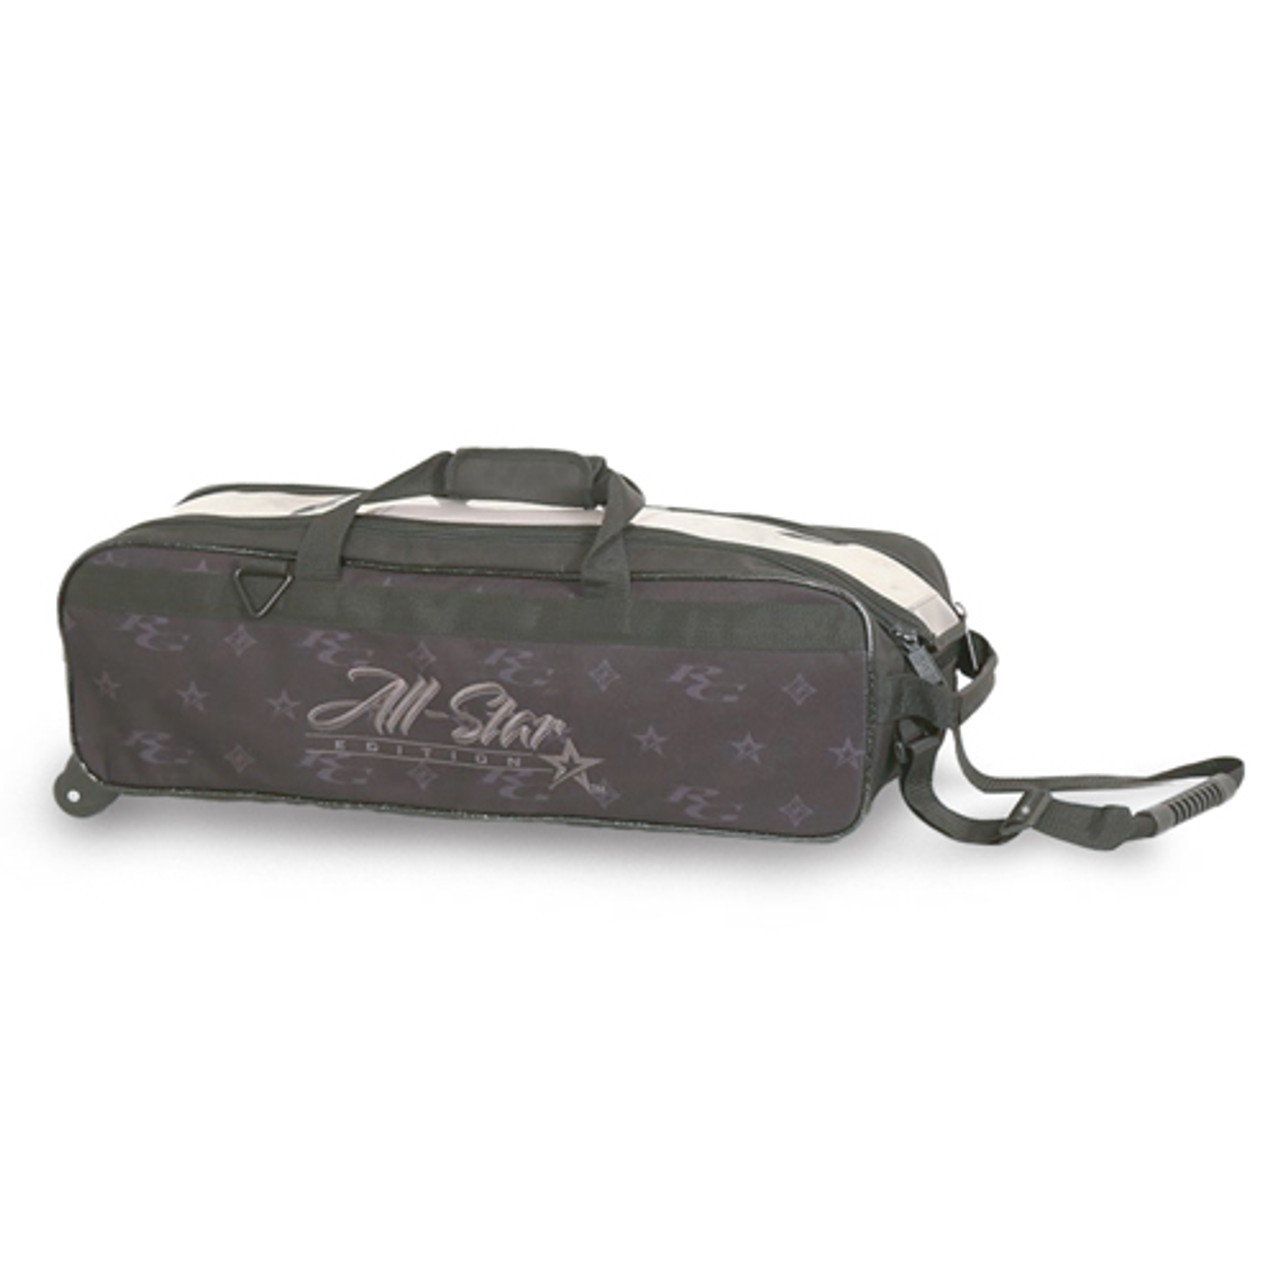 Roto Grip 3 Ball All-Star Edition Travel Tote Blackout